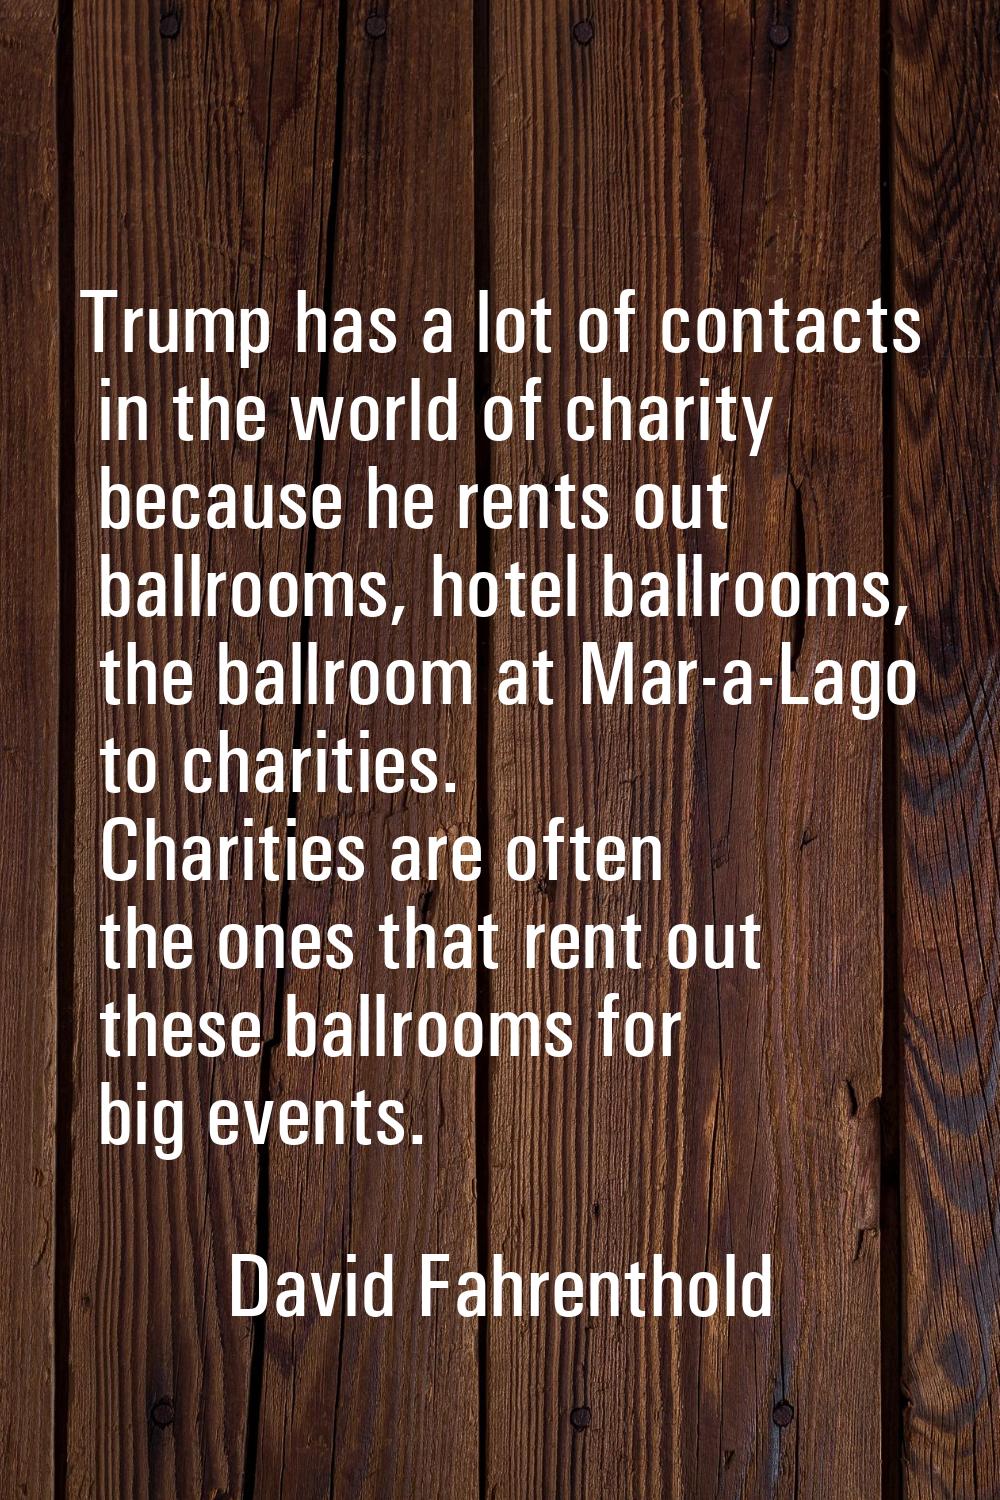 Trump has a lot of contacts in the world of charity because he rents out ballrooms, hotel ballrooms